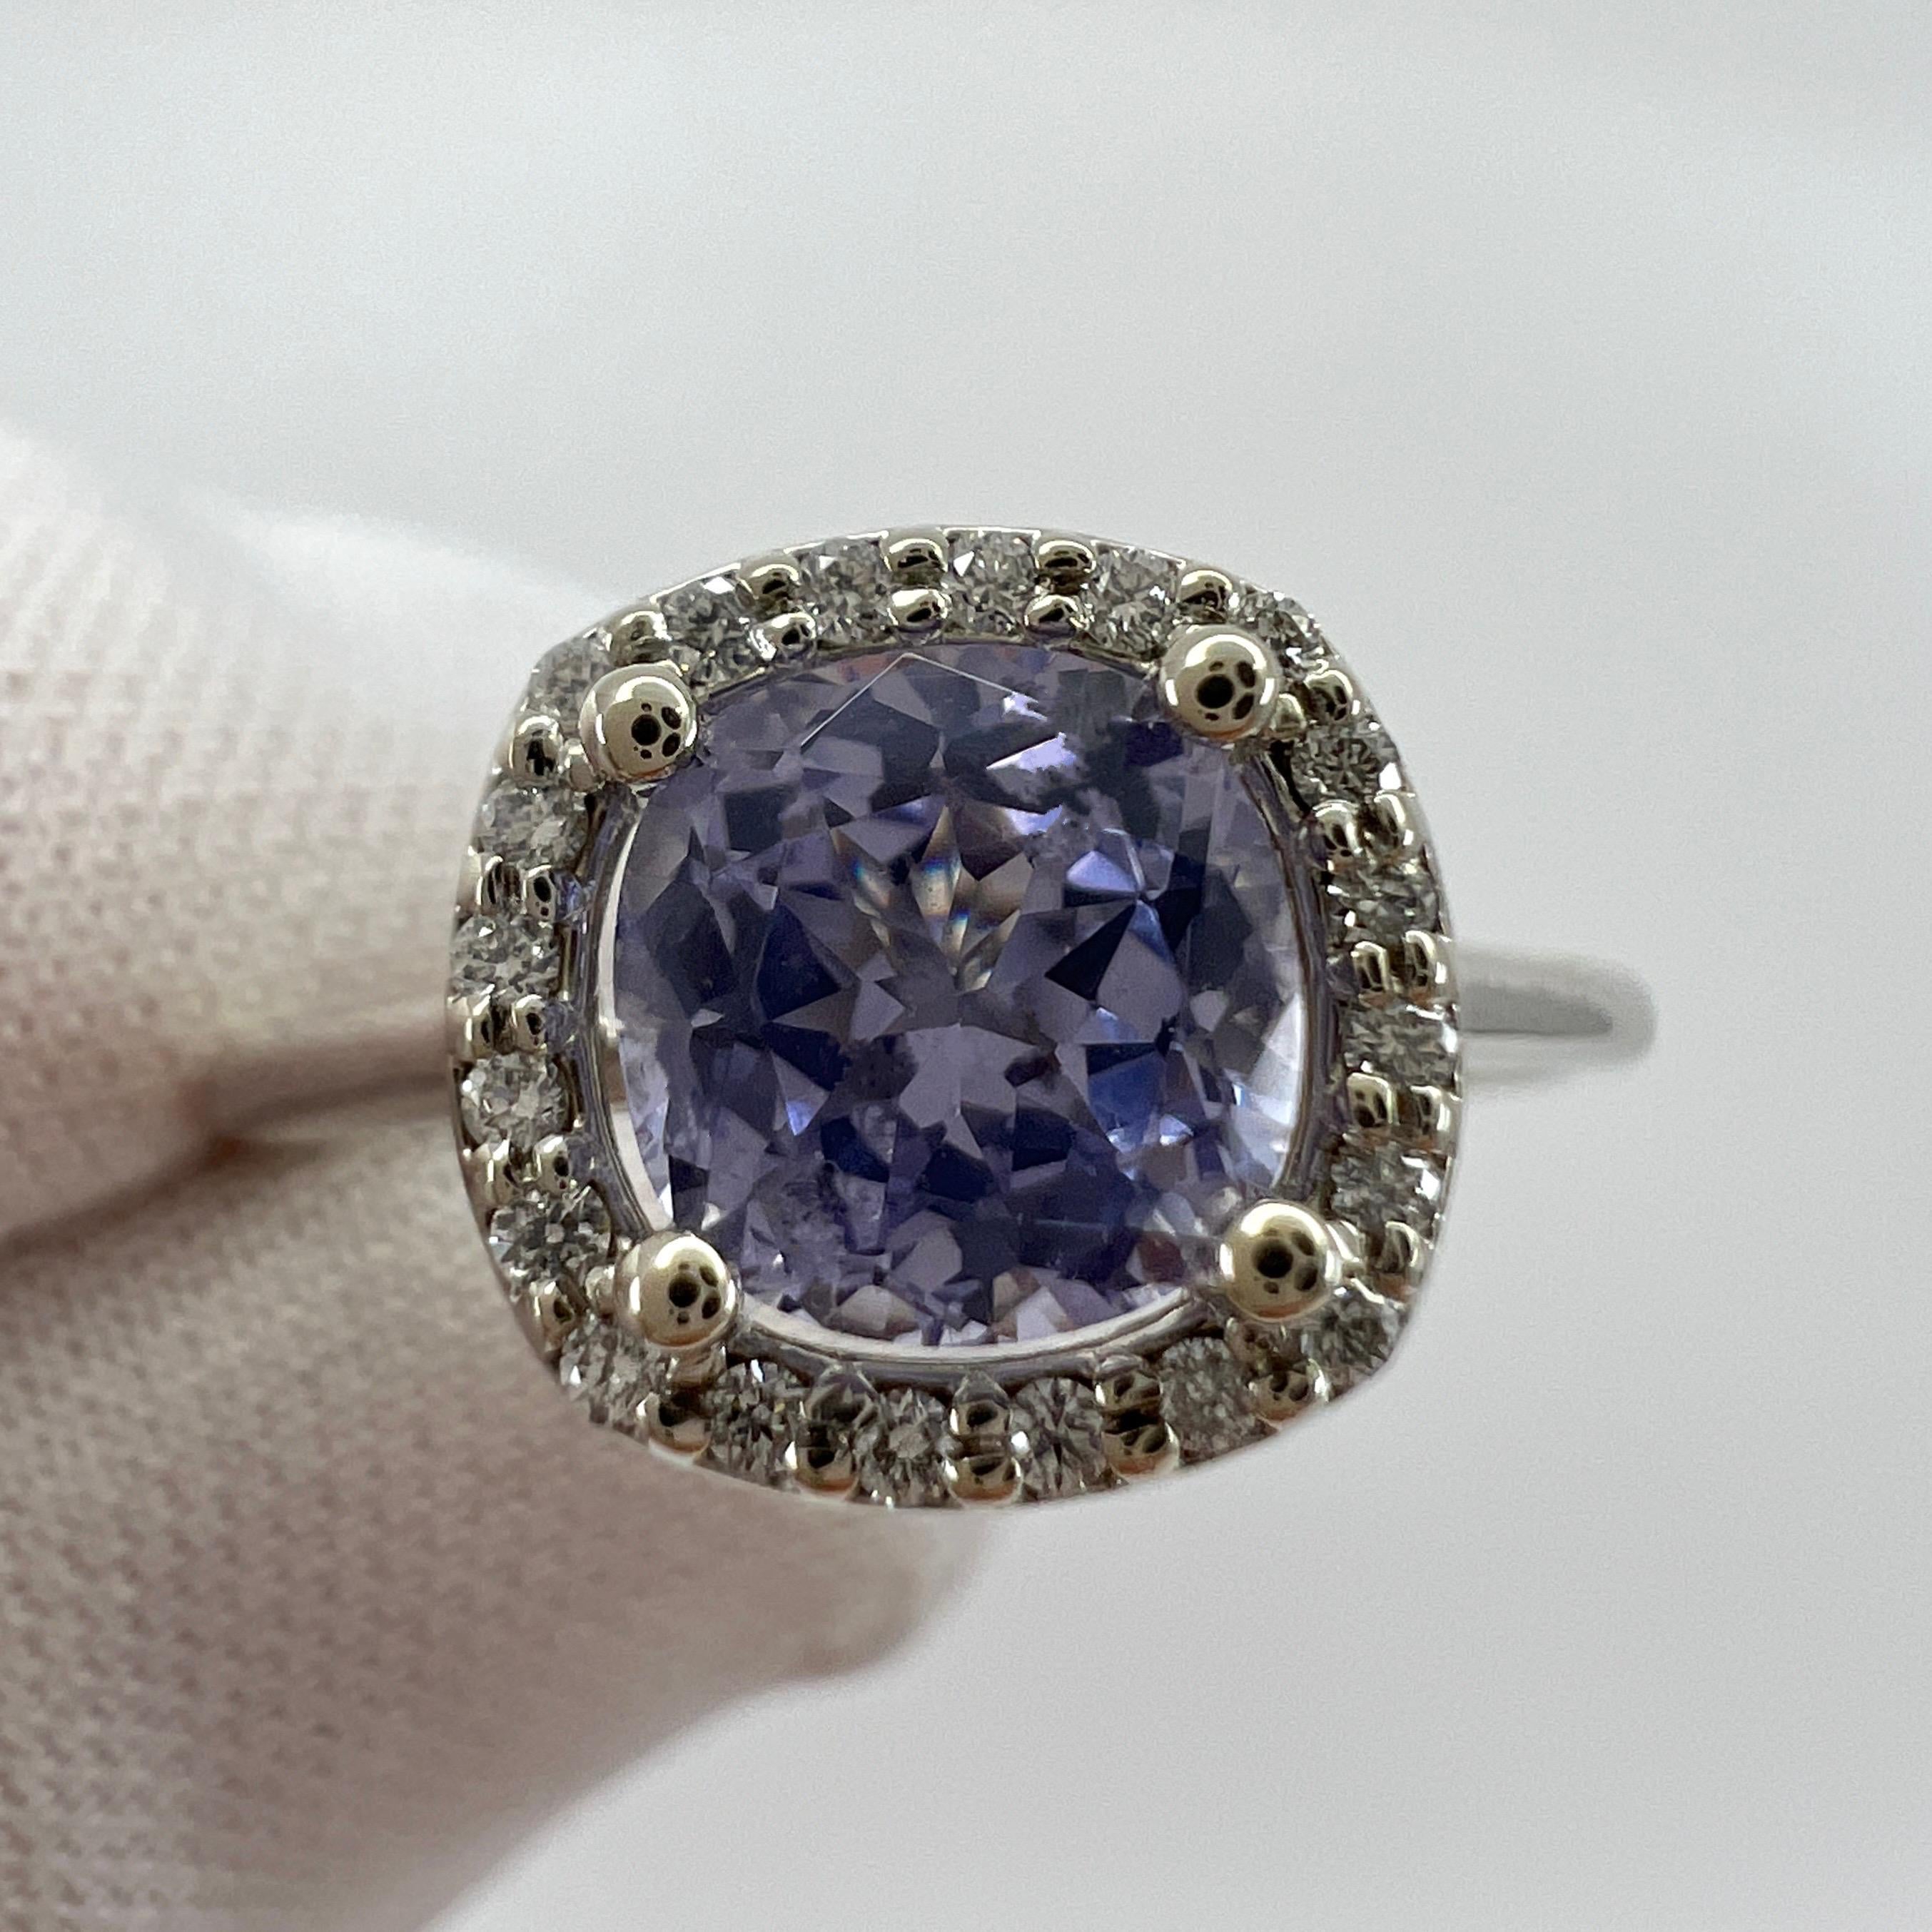 1.02ct Vivid Lilac Purple Spinel & Diamond 18k White Gold Cushion Cut Halo Ring For Sale 1